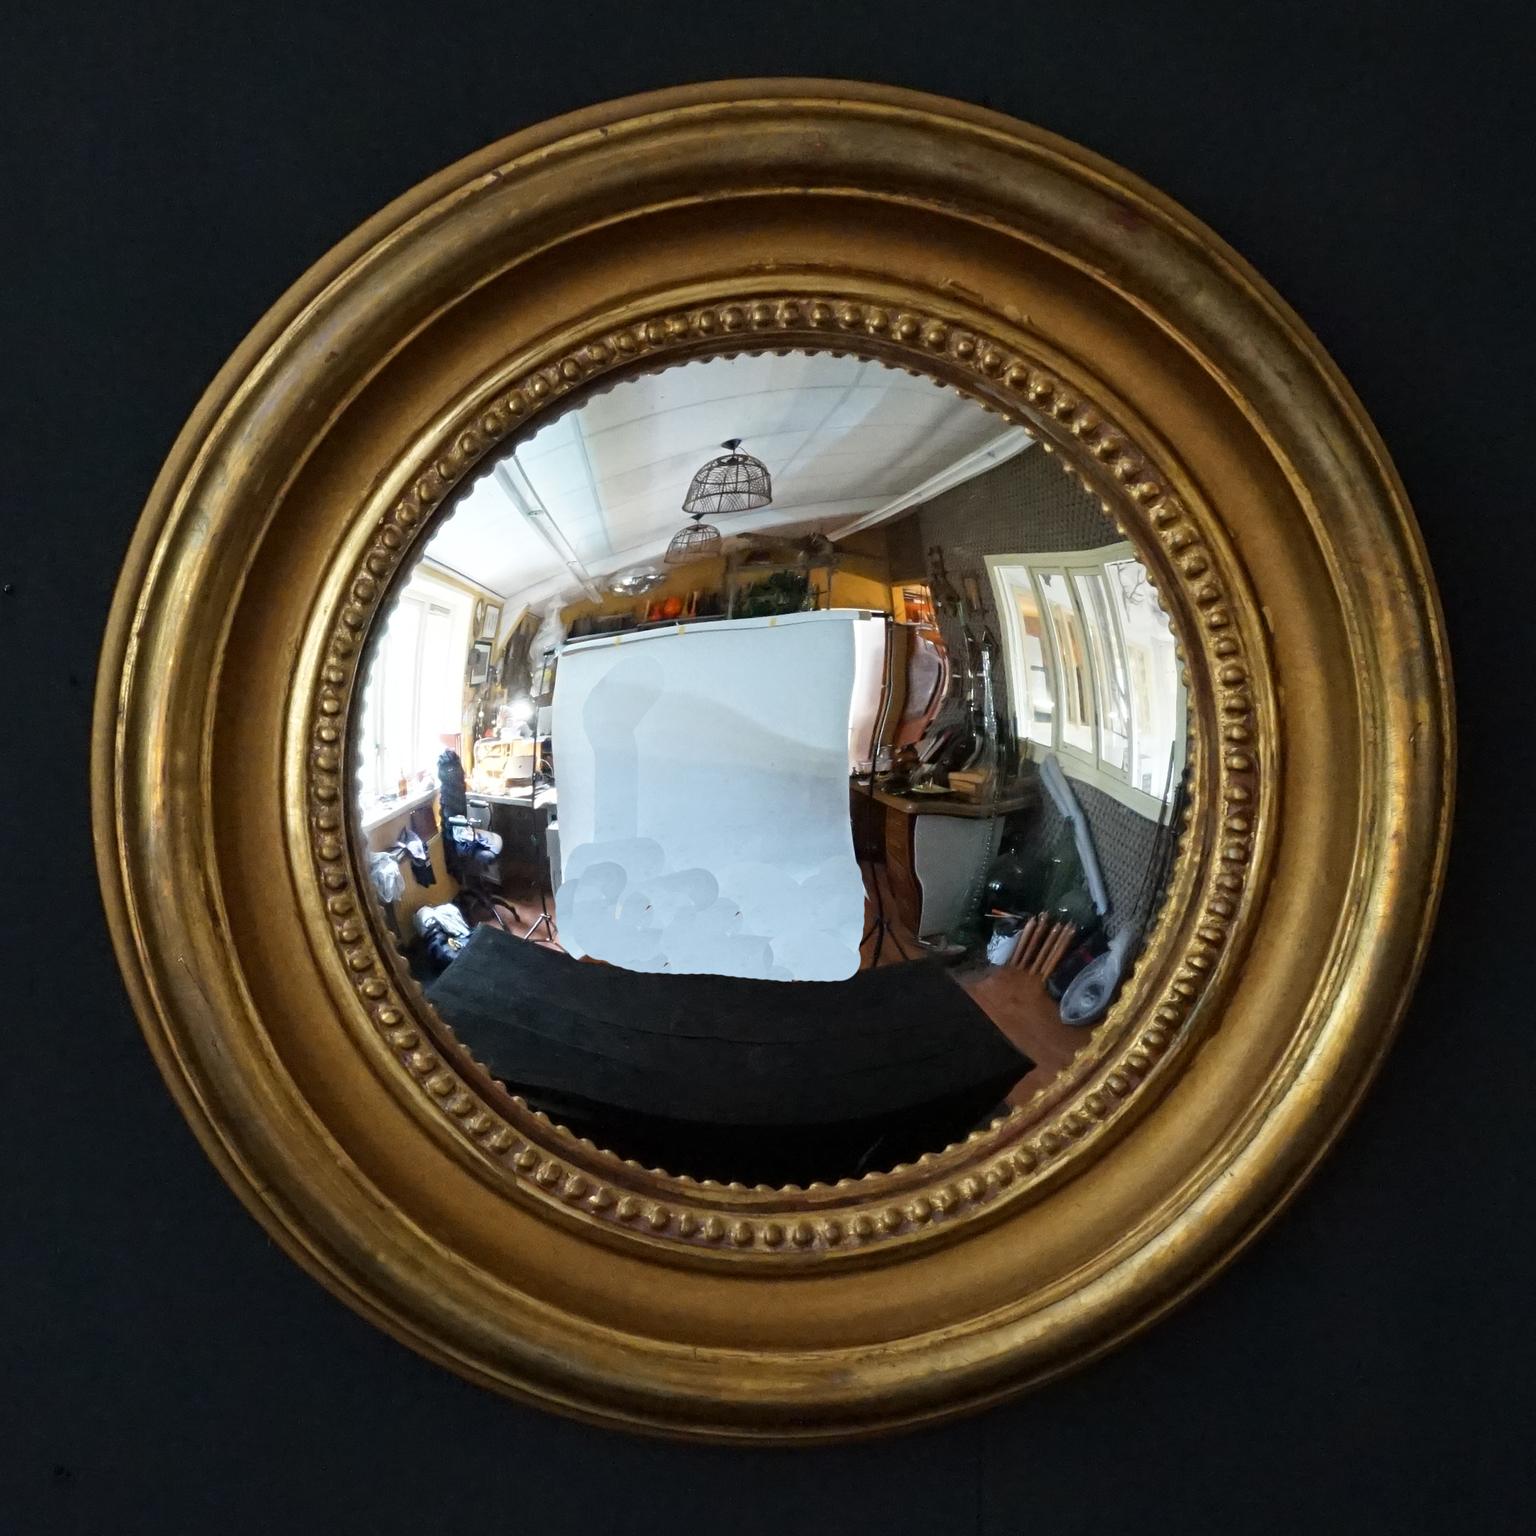 Perfect vintage wall decoration.
Medium size round convex mirrors in relief pearled plastered gilt wood frames. 
Great addition to any wall and impactful statement on its own.
Imagine this in your hallway, bathroom or in a collection of vintage